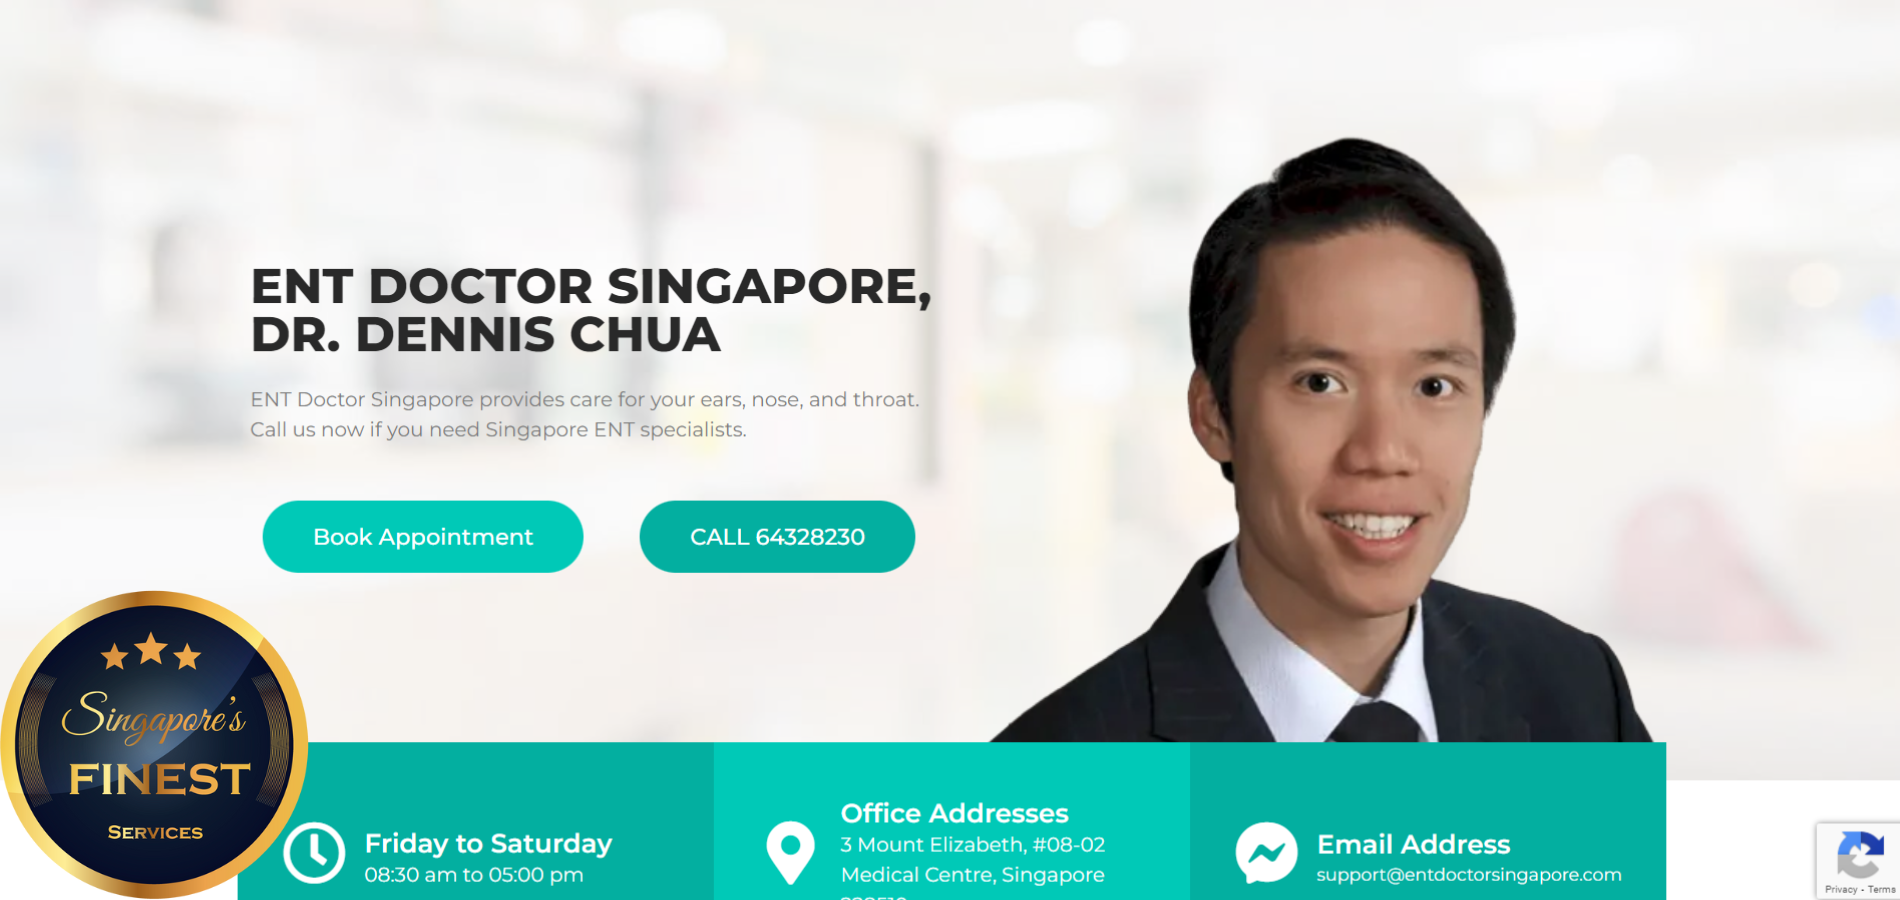 The Finest Clinics for Allergy Test in Singapore